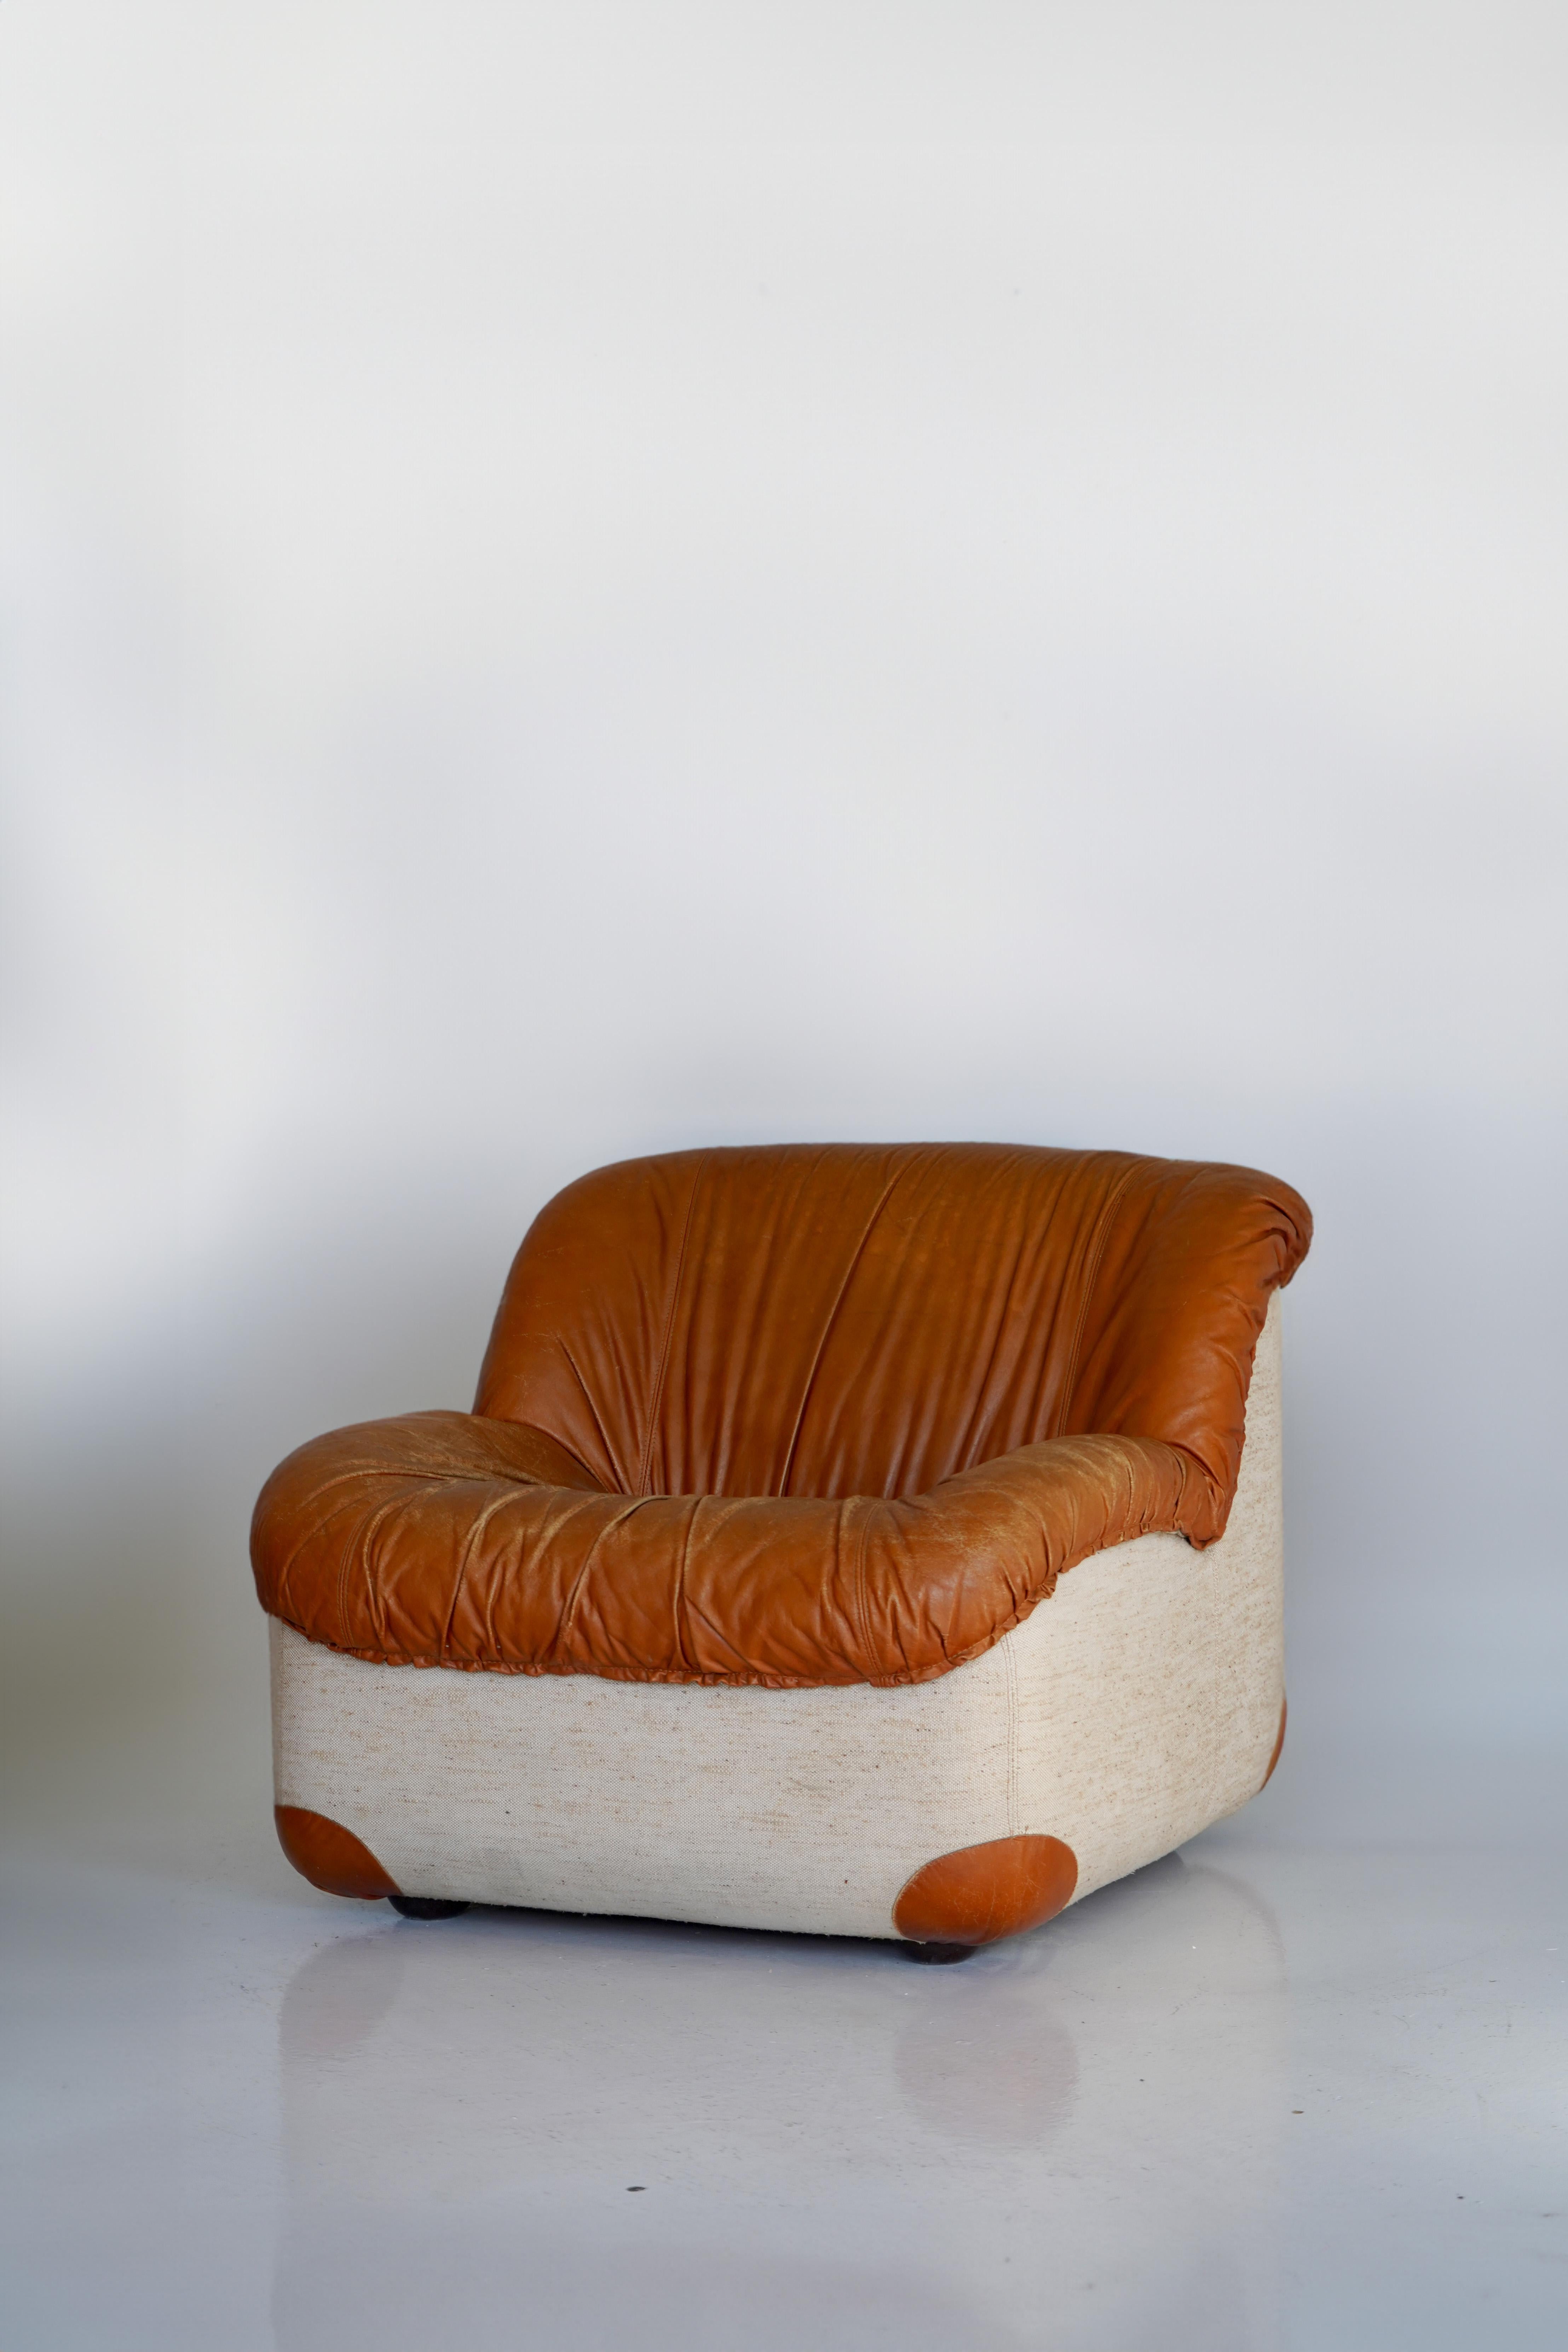 20th Century Leather and Canvas Caprice Chairs, Henning Korch for Swan, Italy 1970s